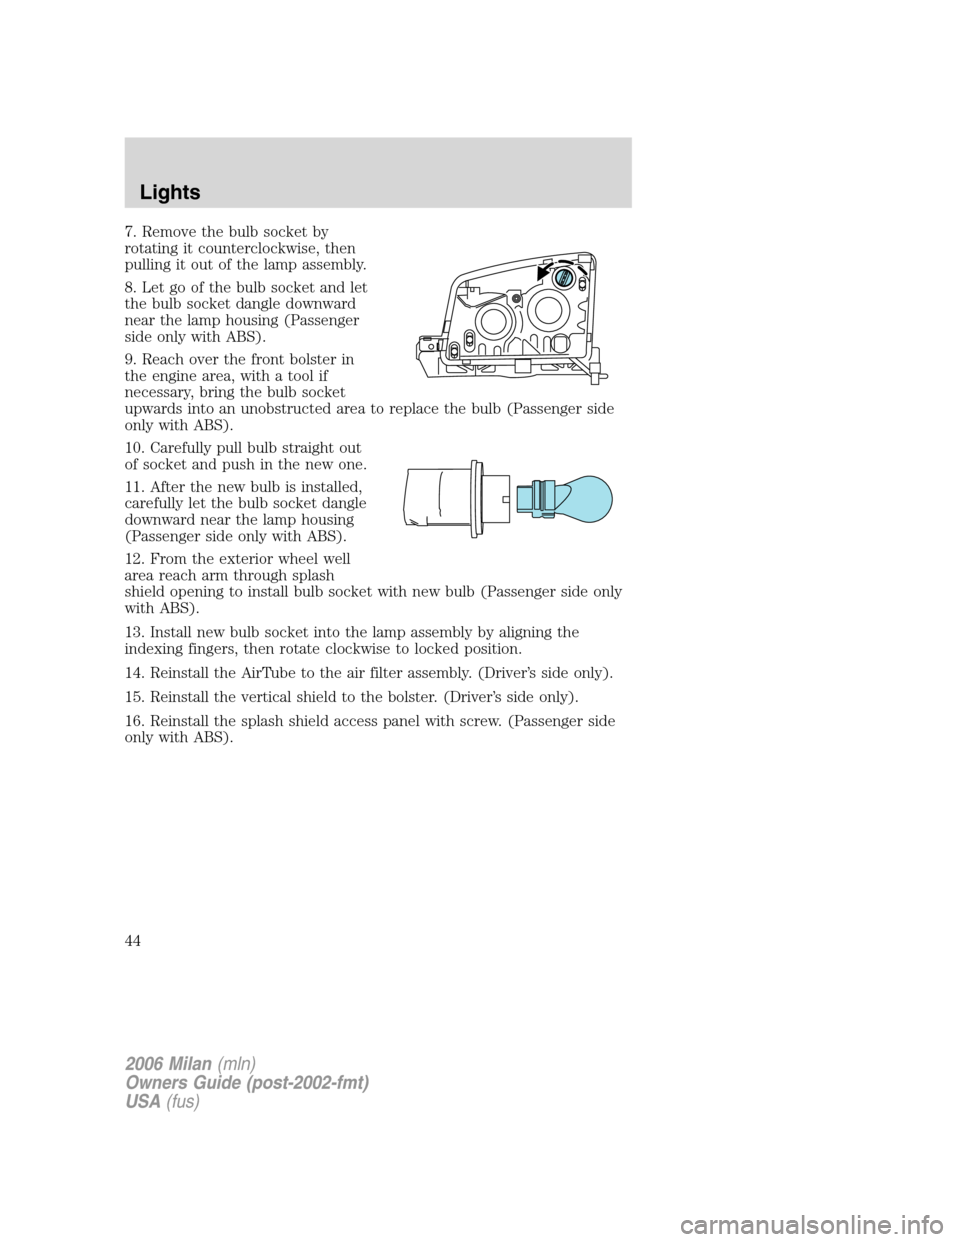 Mercury Milan 2006  s Service Manual 7. Remove the bulb socket by
rotating it counterclockwise, then
pulling it out of the lamp assembly.
8. Let go of the bulb socket and let
the bulb socket dangle downward
near the lamp housing (Passeng